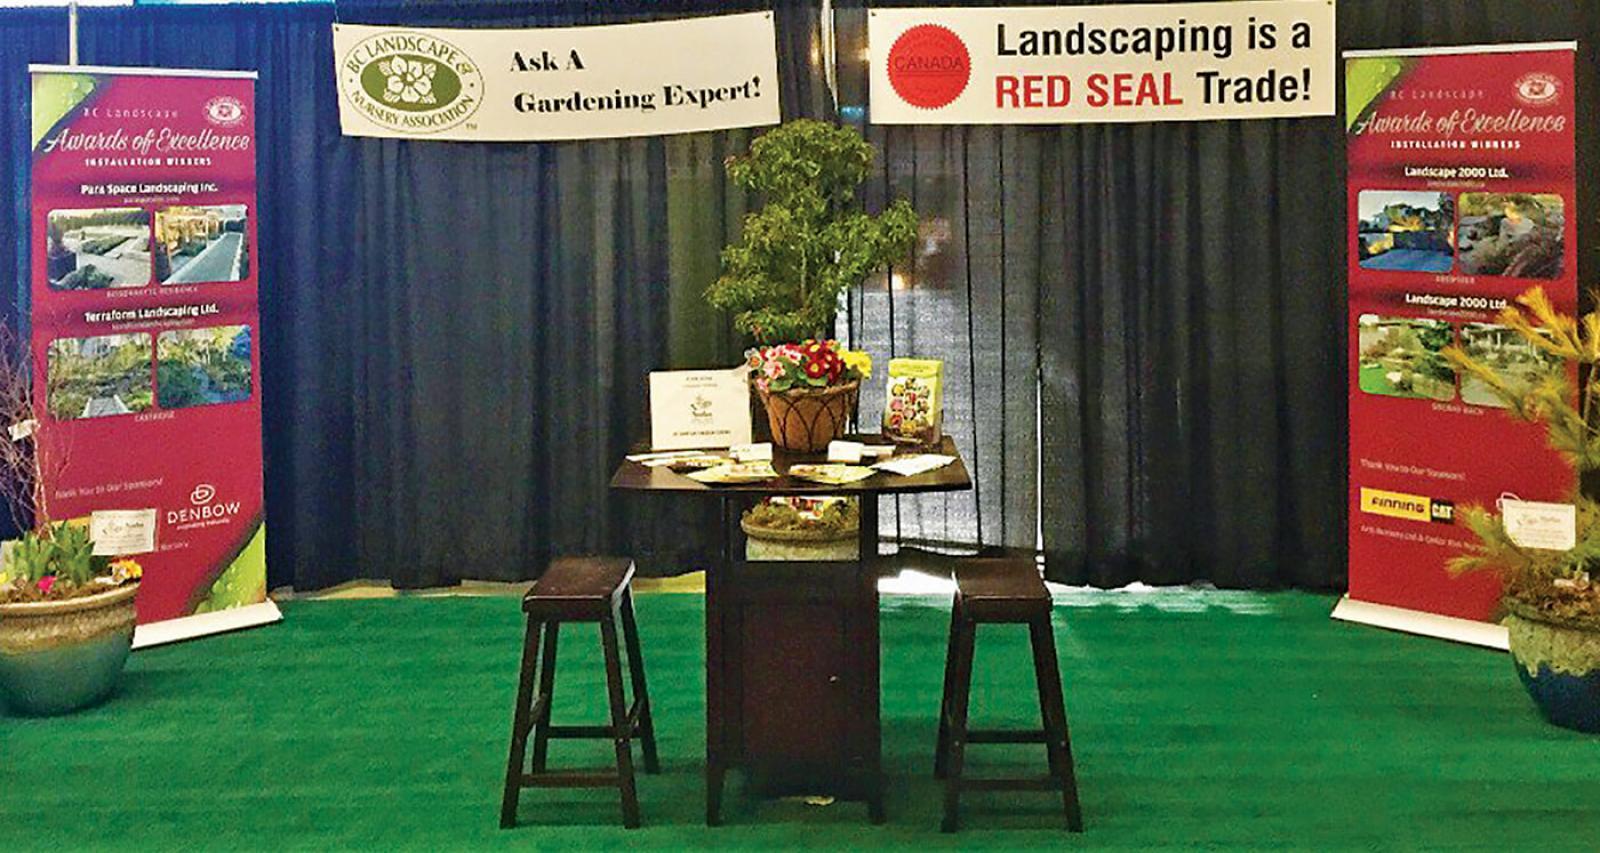 BCLNA booth at the Vancouver home show.